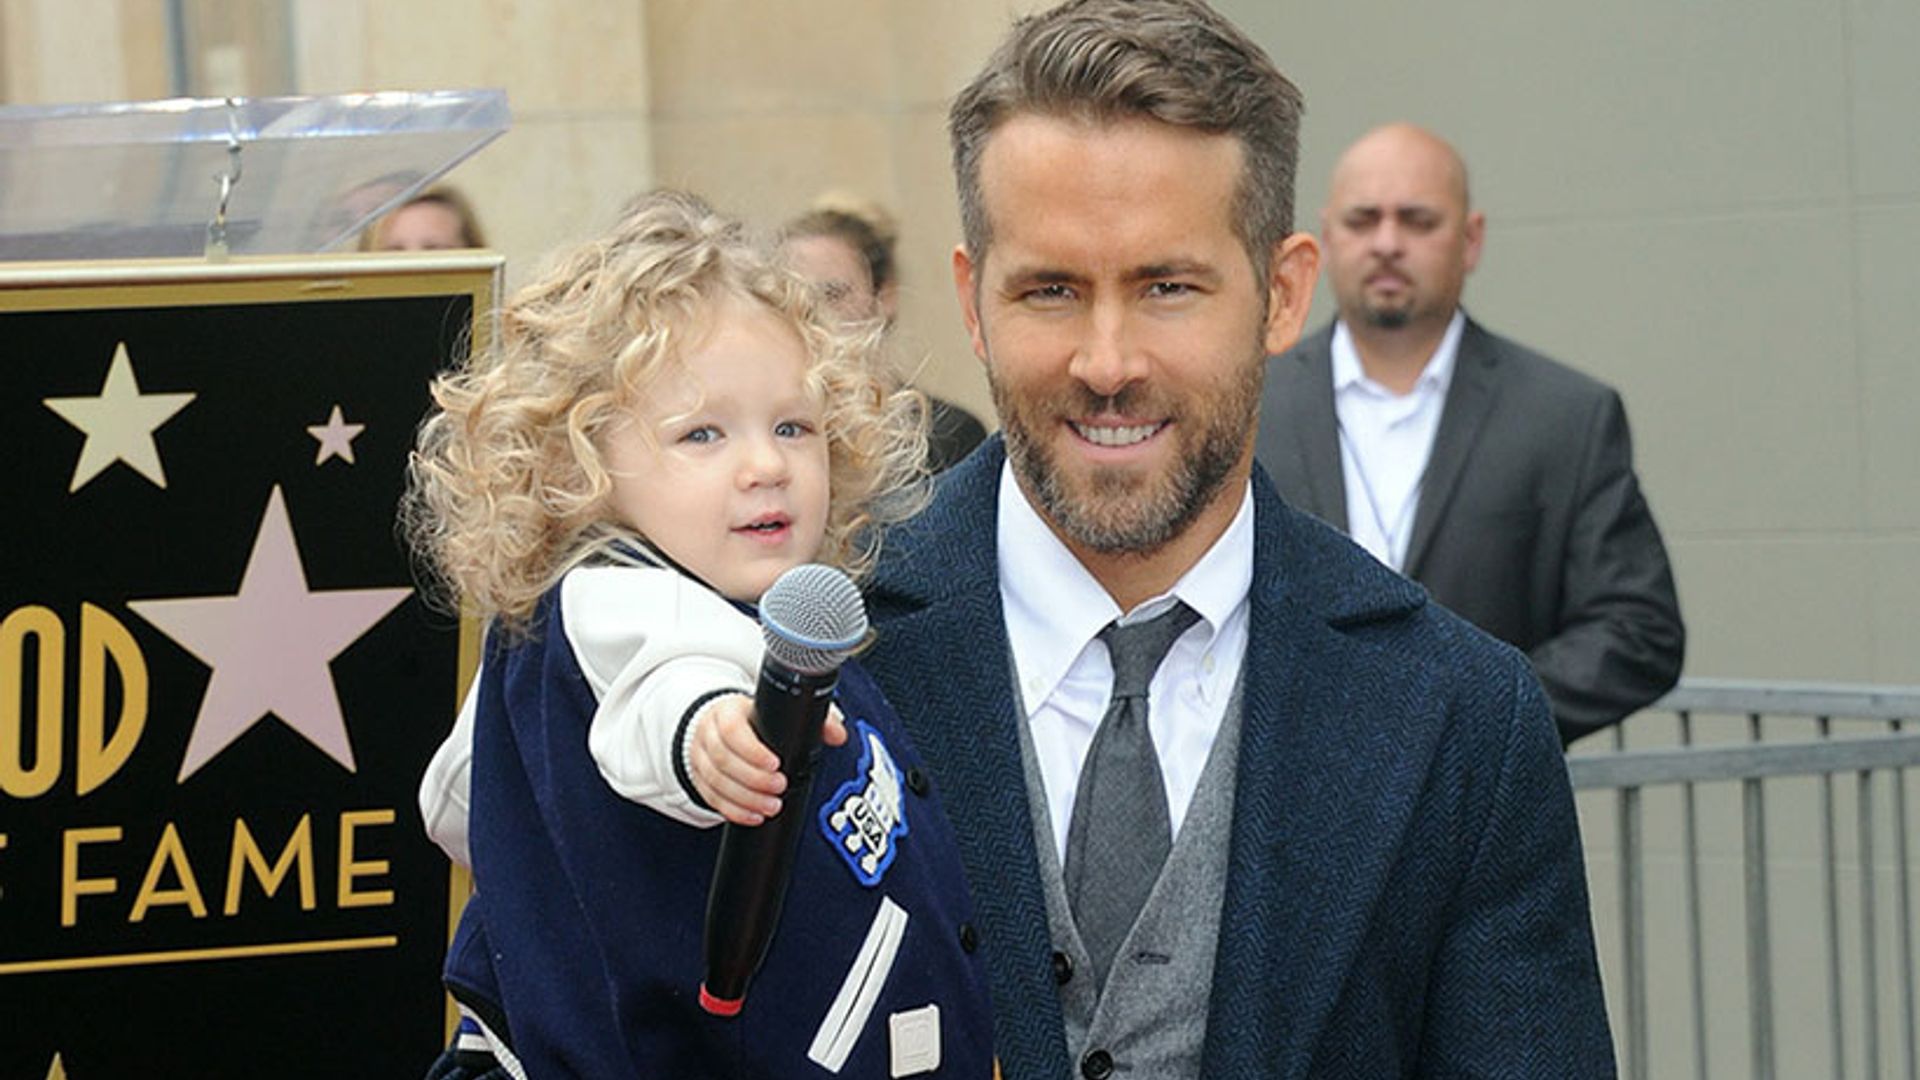 Ryan Reynolds is every parent who fears travelling with kids